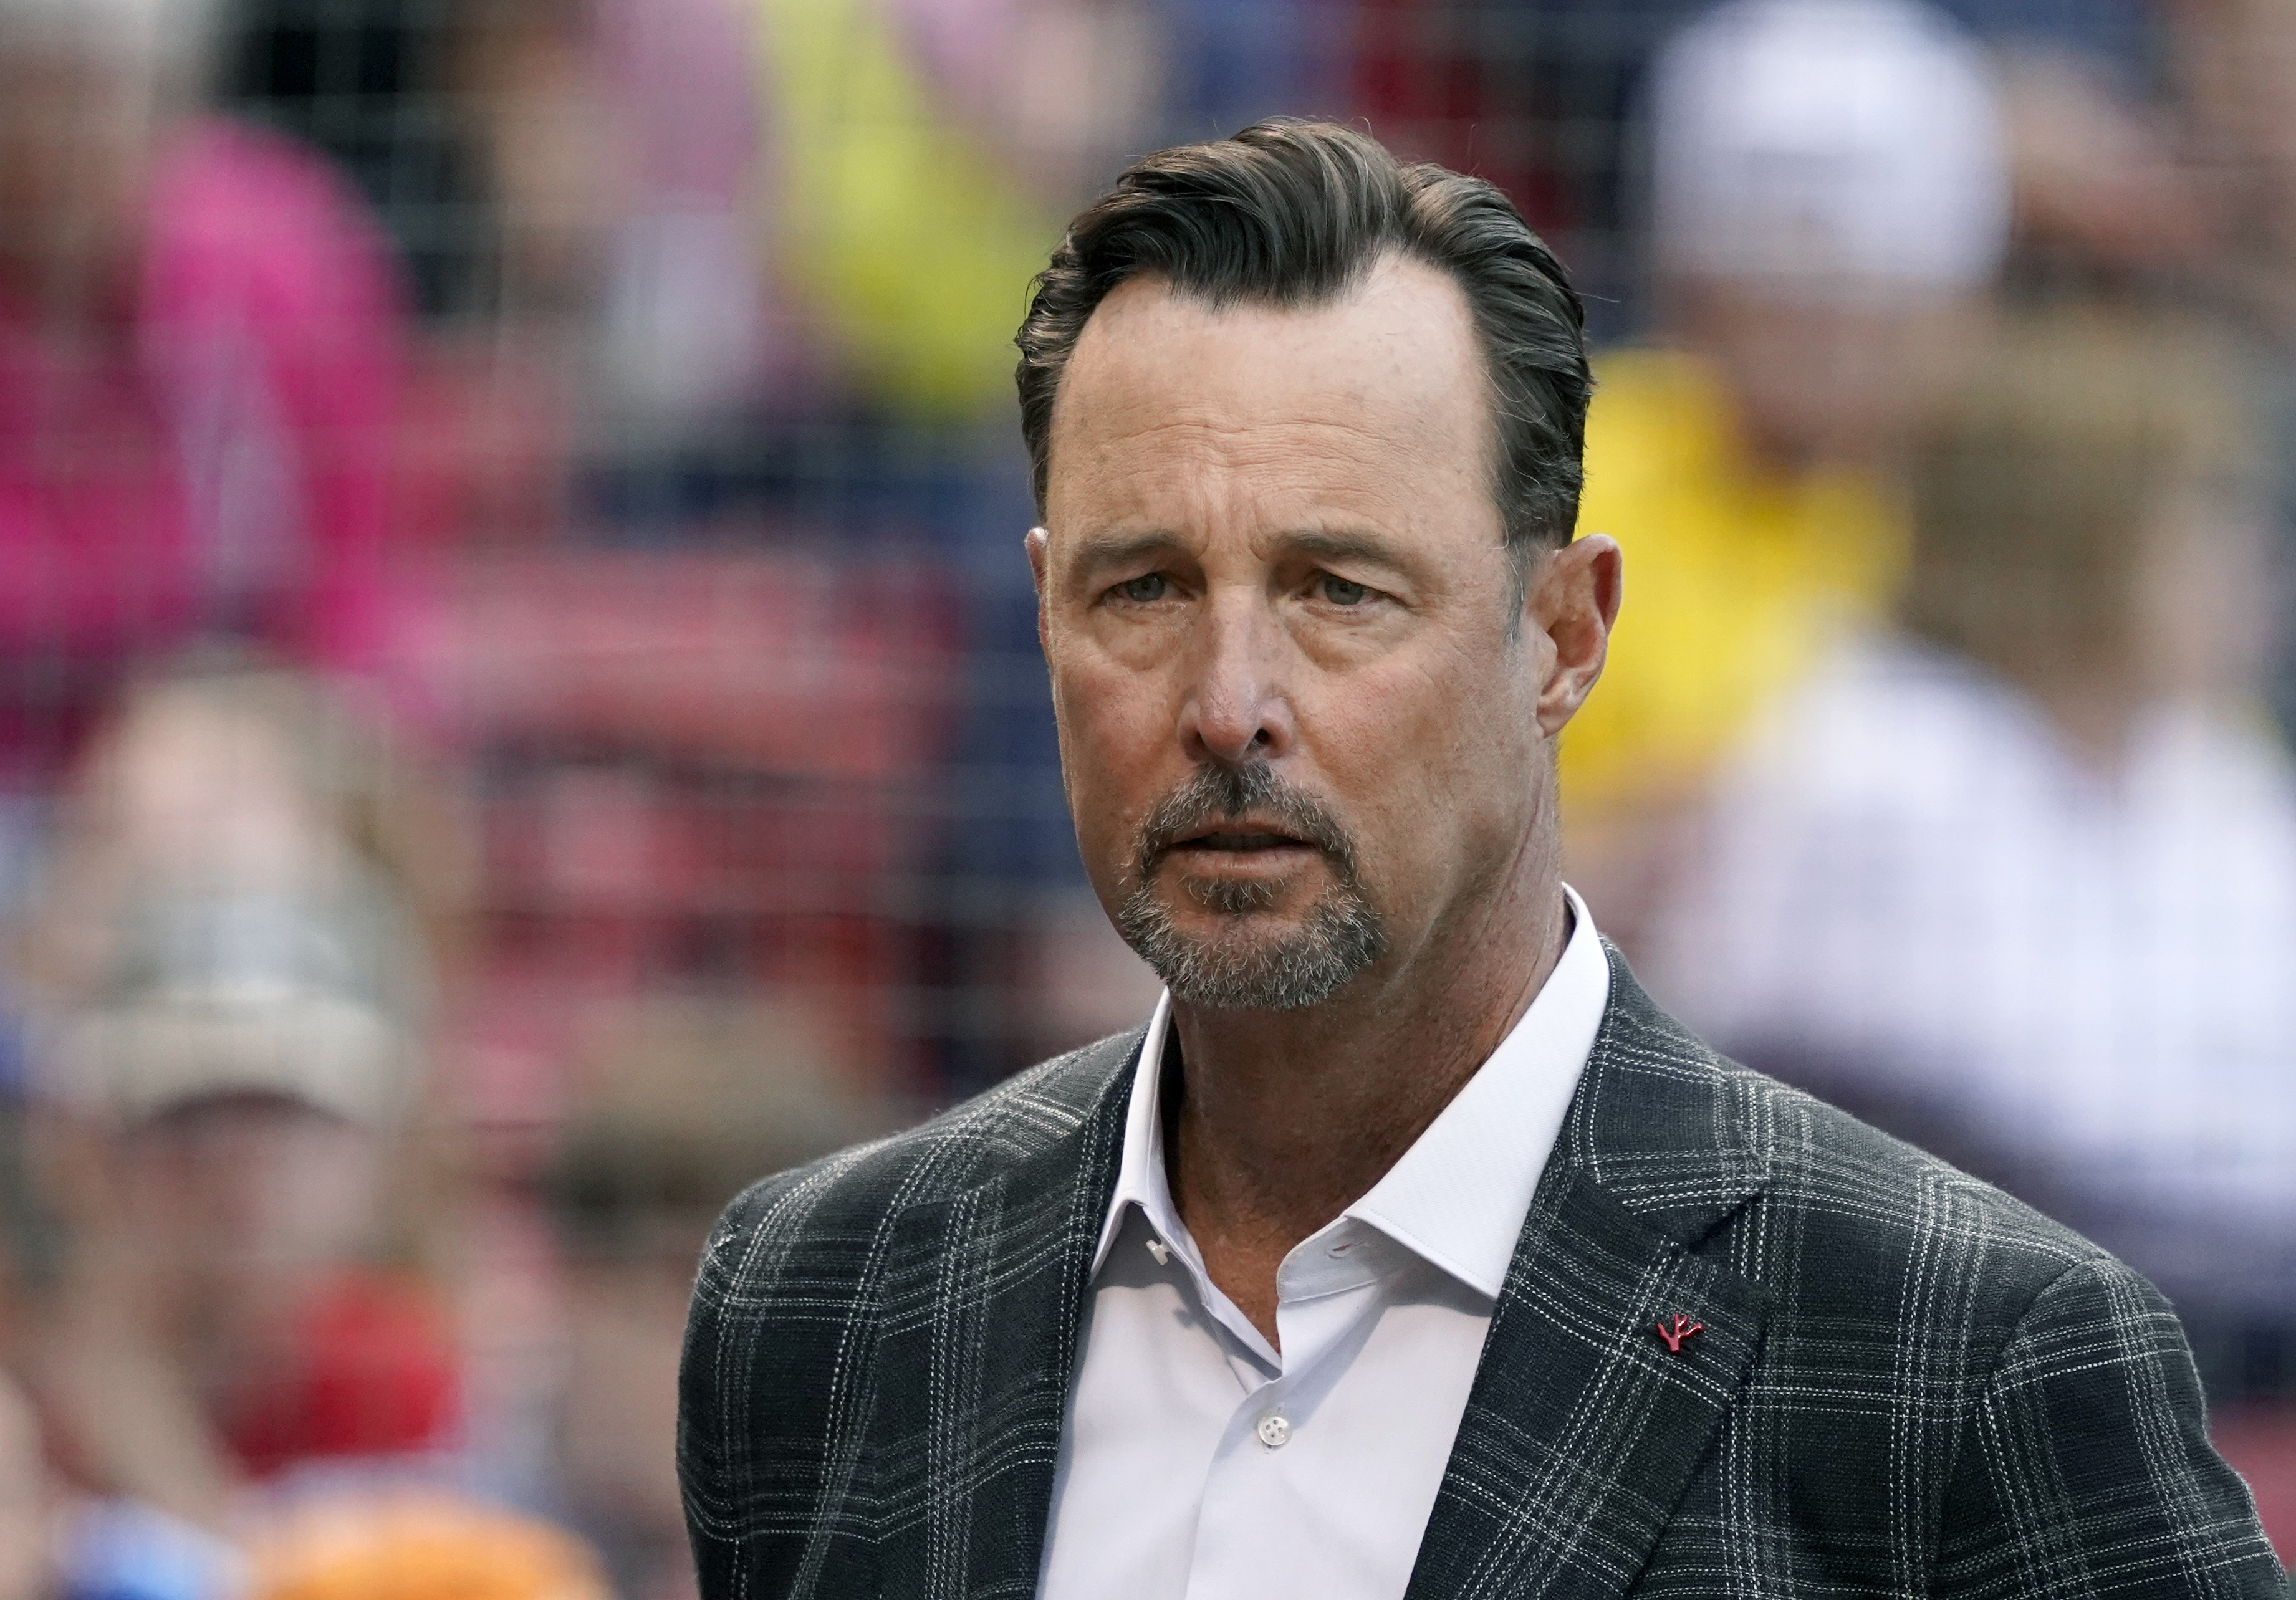 Former Red Sox pitcher Tim Wakefield dies at 57